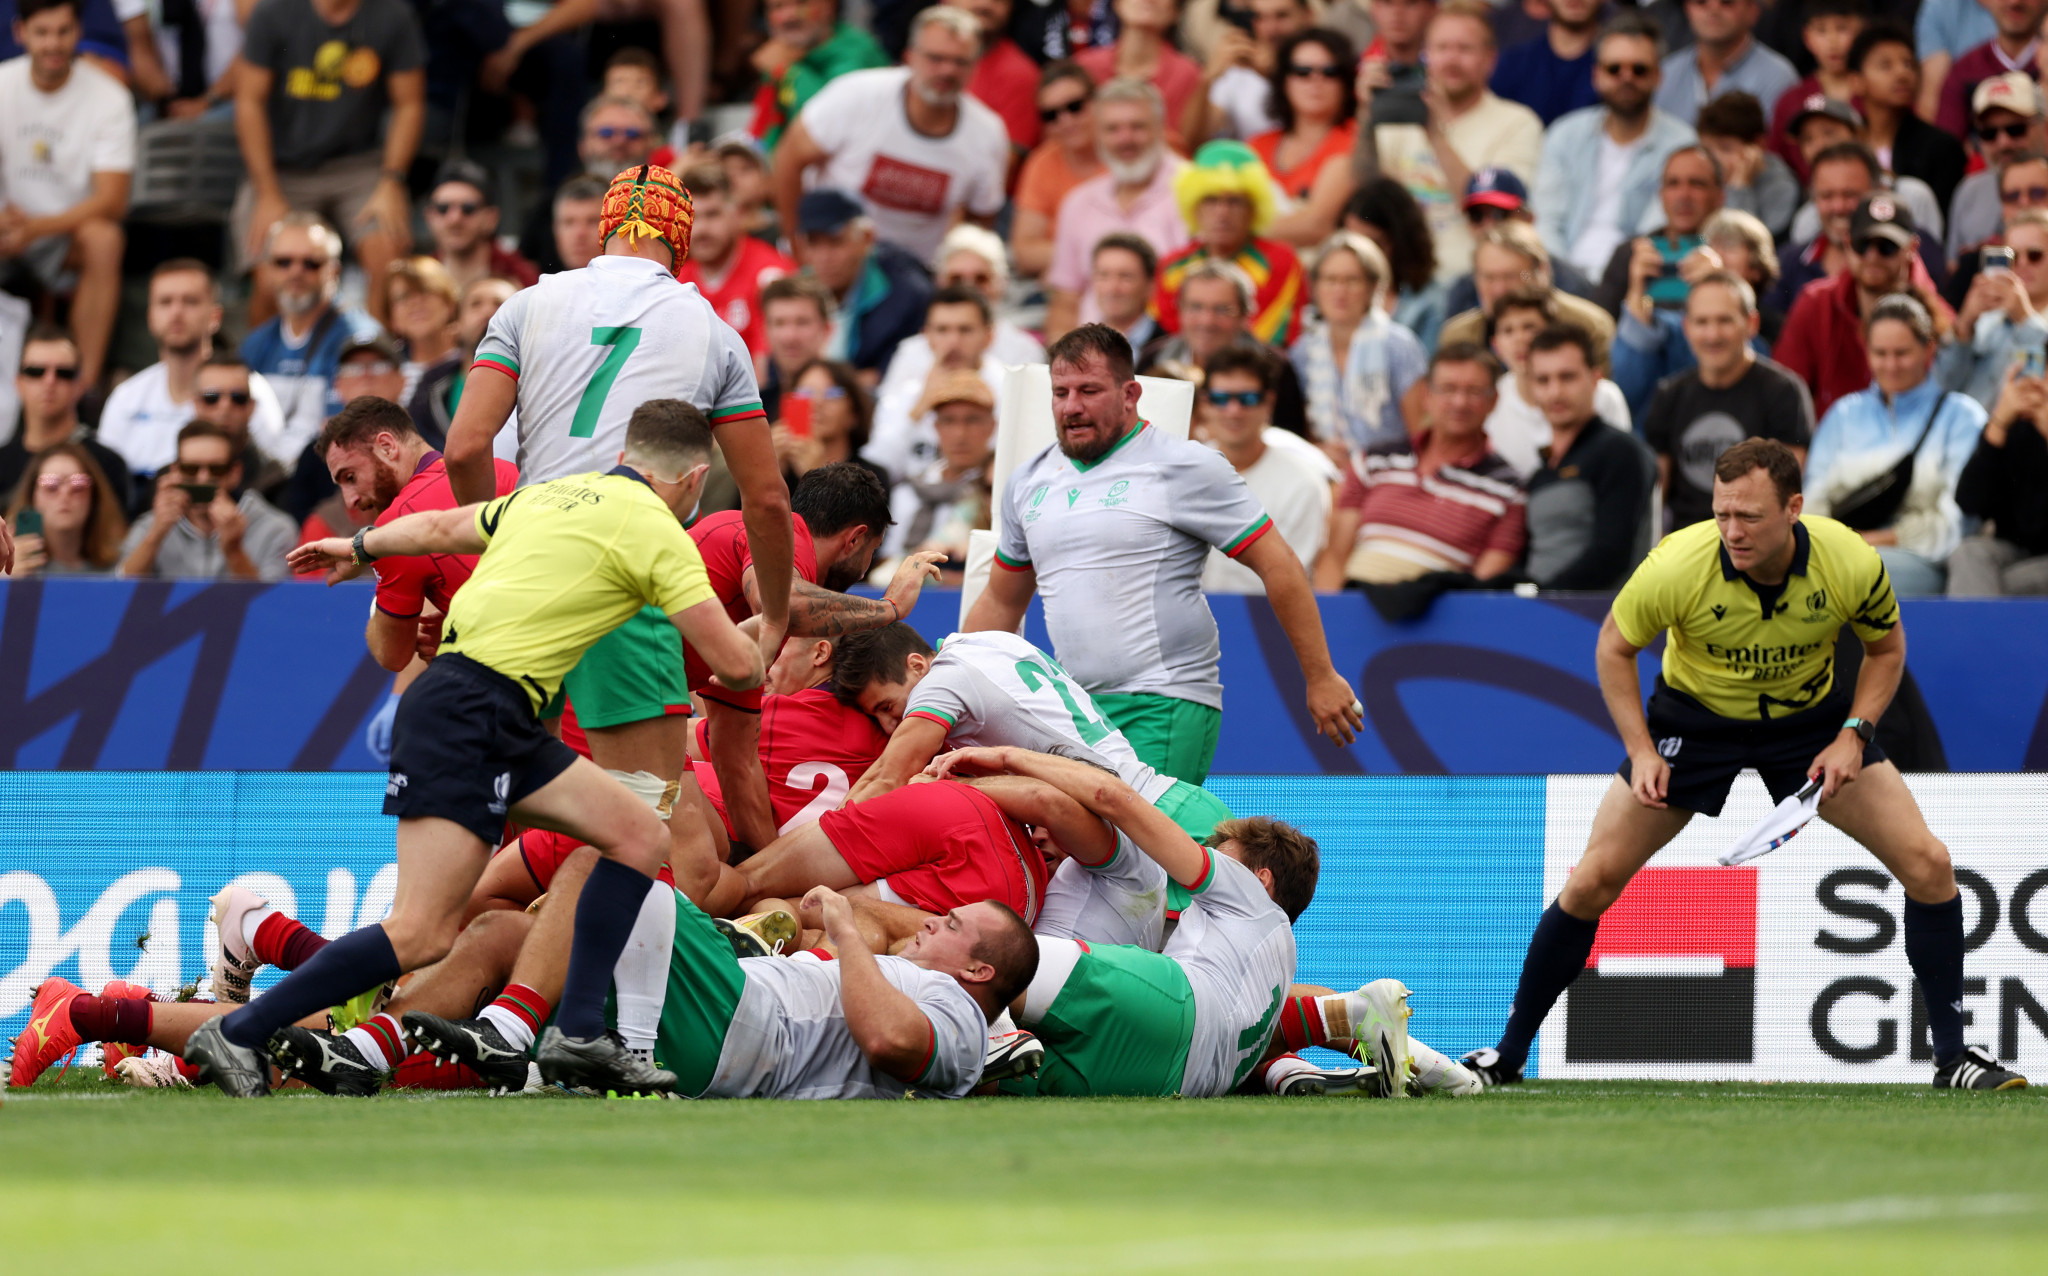 Tengizi Zamtaradze scored a late try for Georgia, although the conversion that would have given them the lead against Portugal was missed ©Getty Images